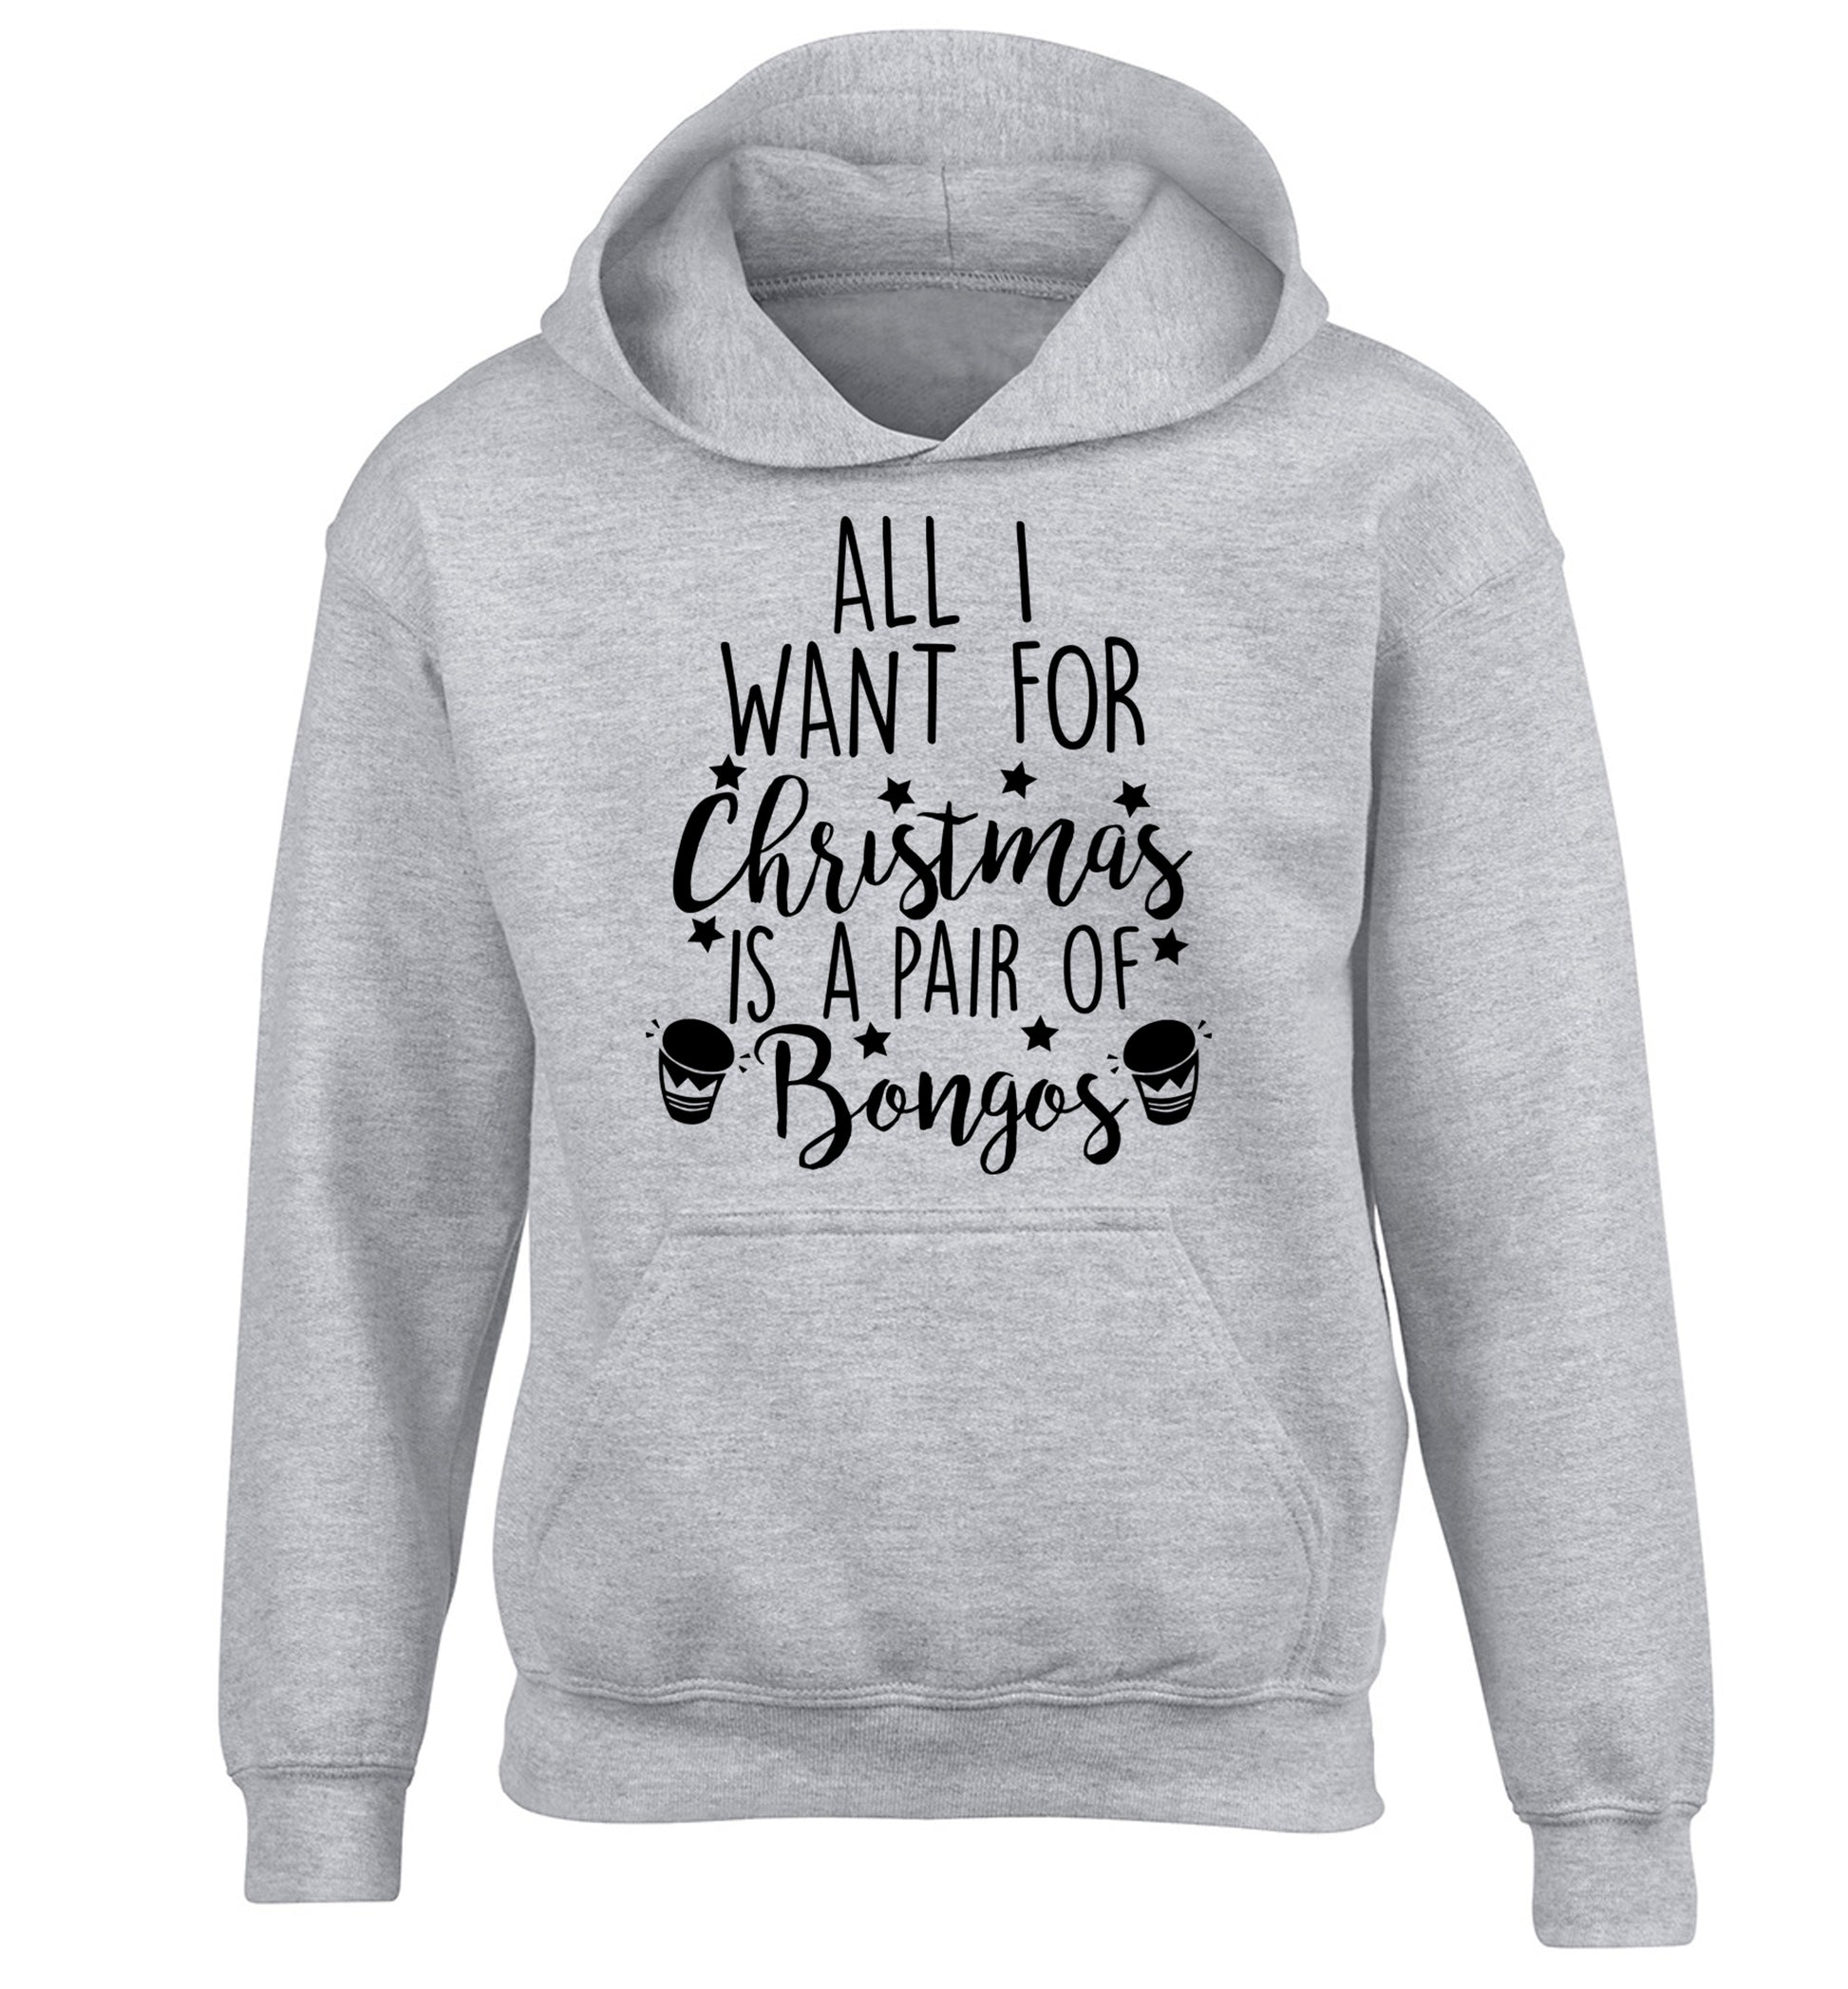 All I want for Christmas is a pair of bongos! children's grey hoodie 12-14 Years